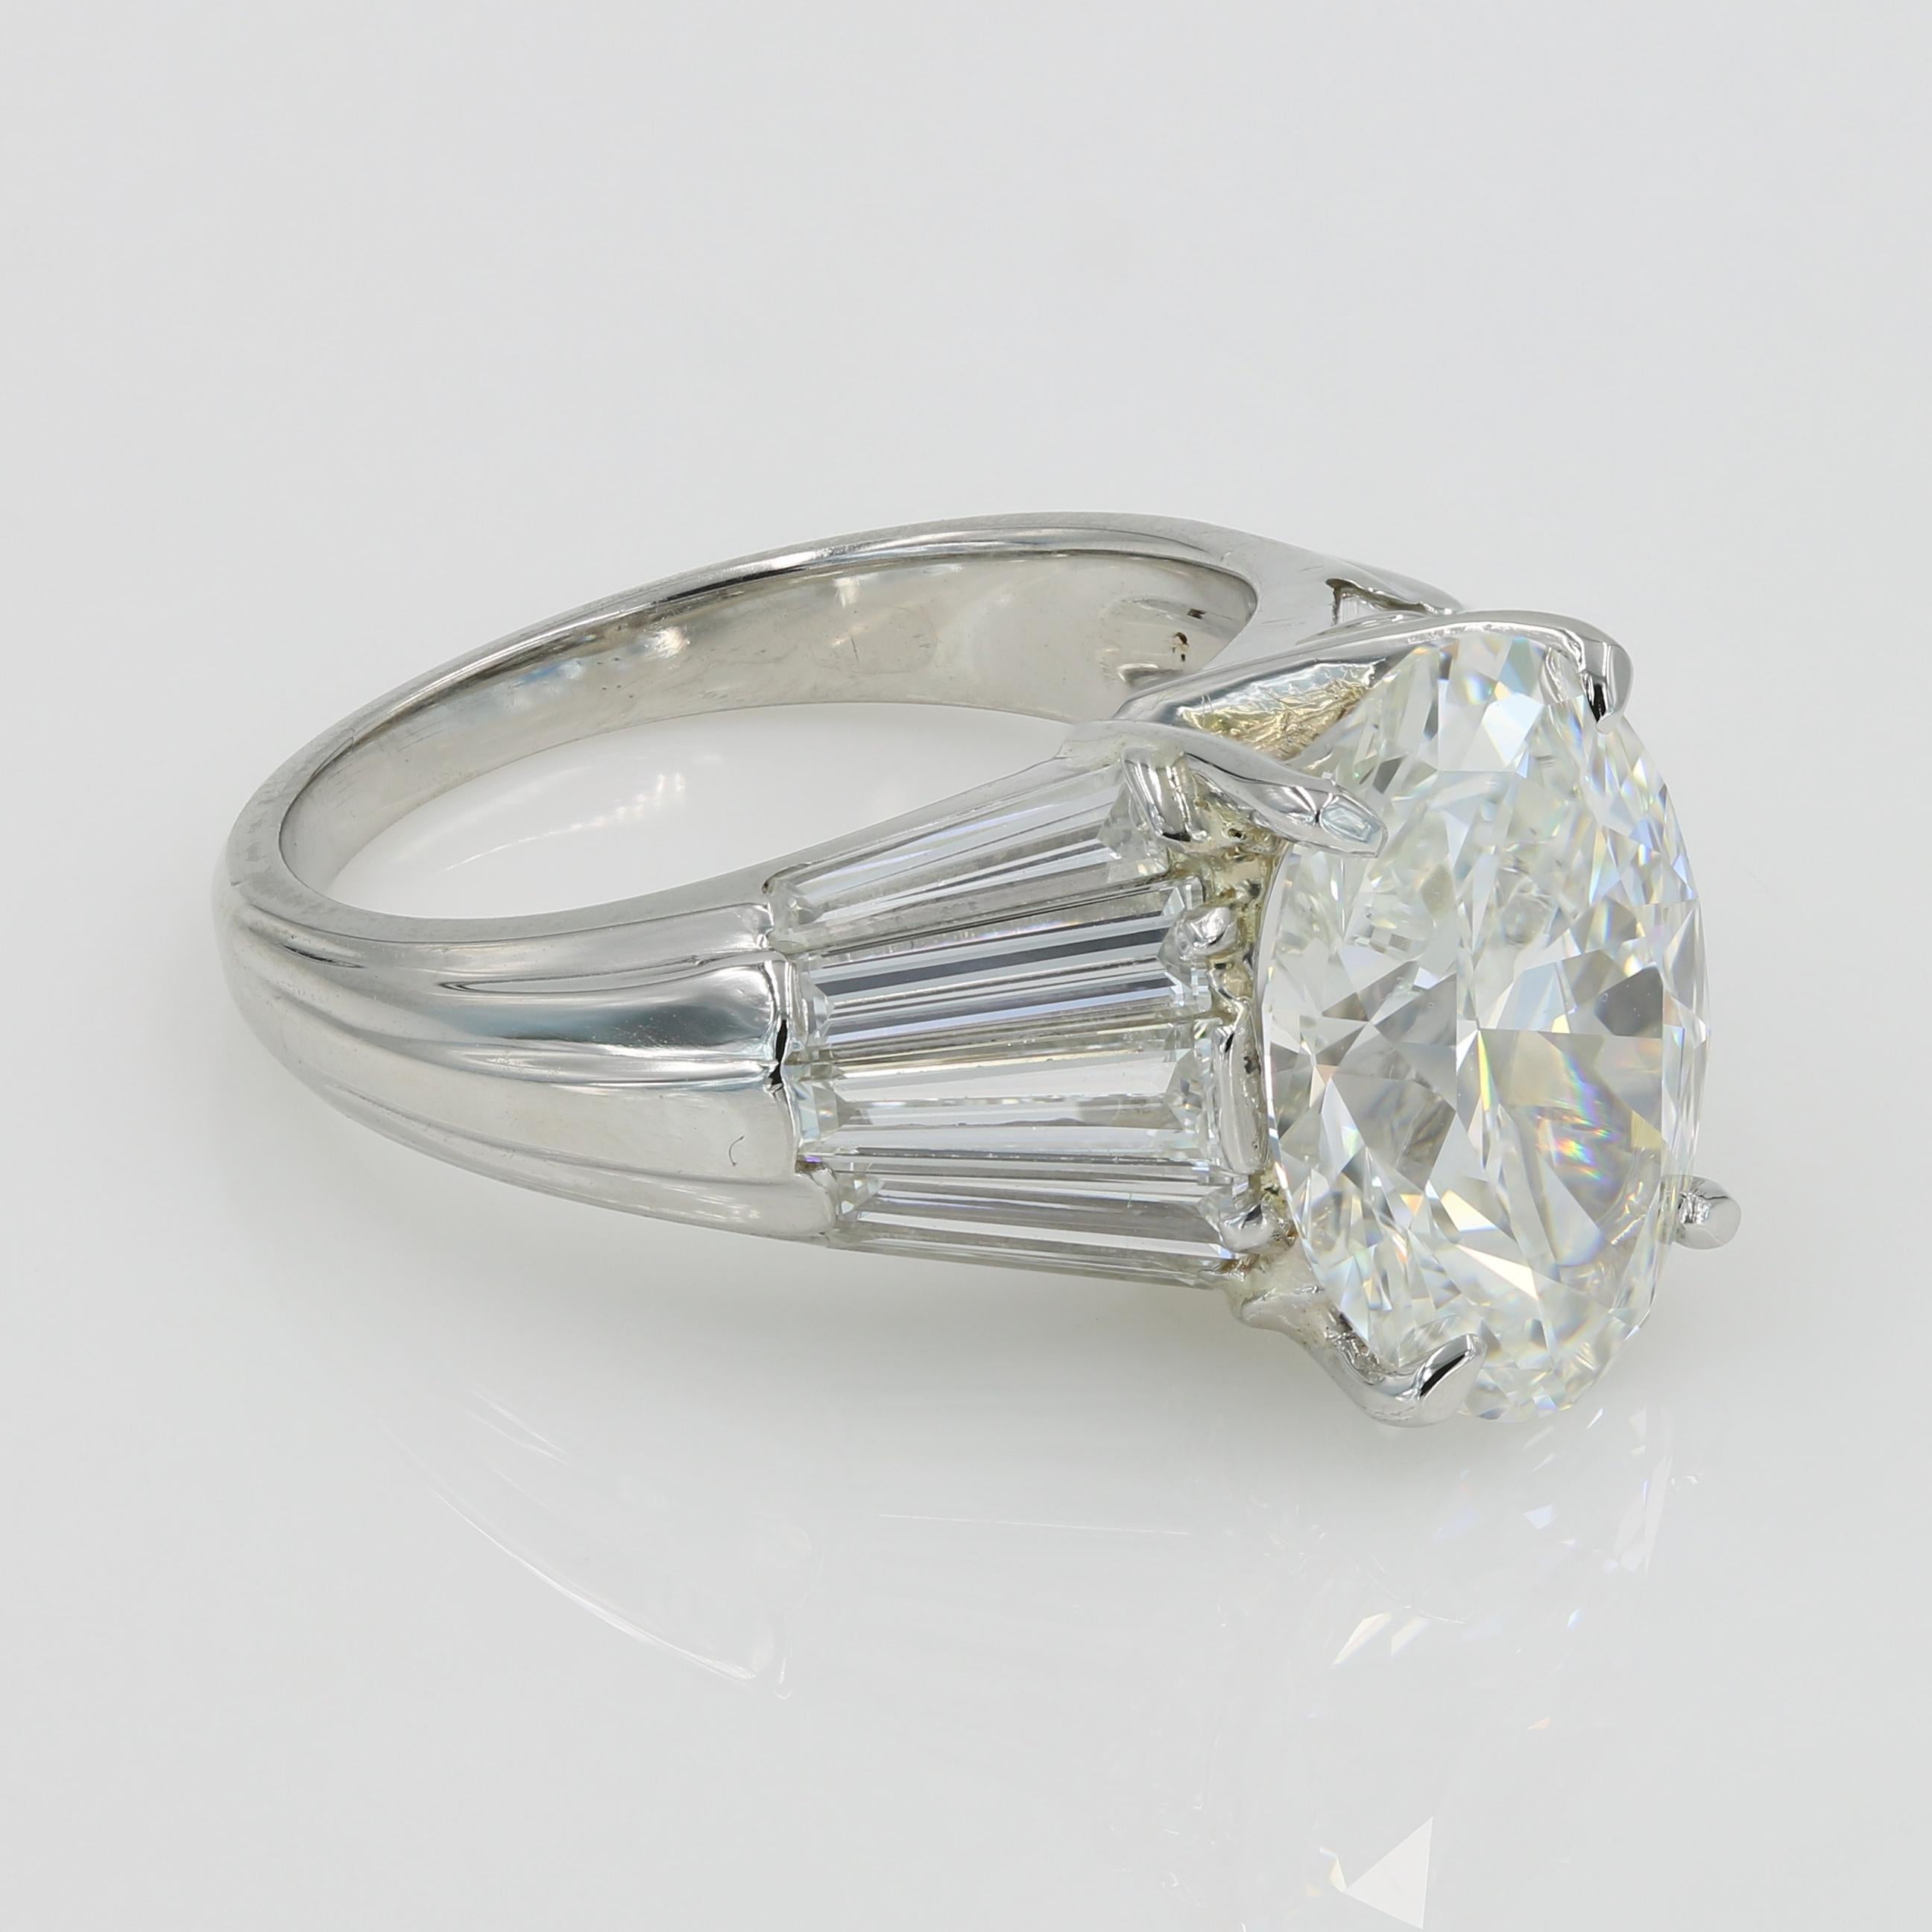 Lester Lampert Signature ring with a beautiful 5.05cts Oval cut diamond, G-VS1 with GIA grading report (#2195525032) set in our platinum with 10 Tapered Baguette cut diamonds =2.40cts. 